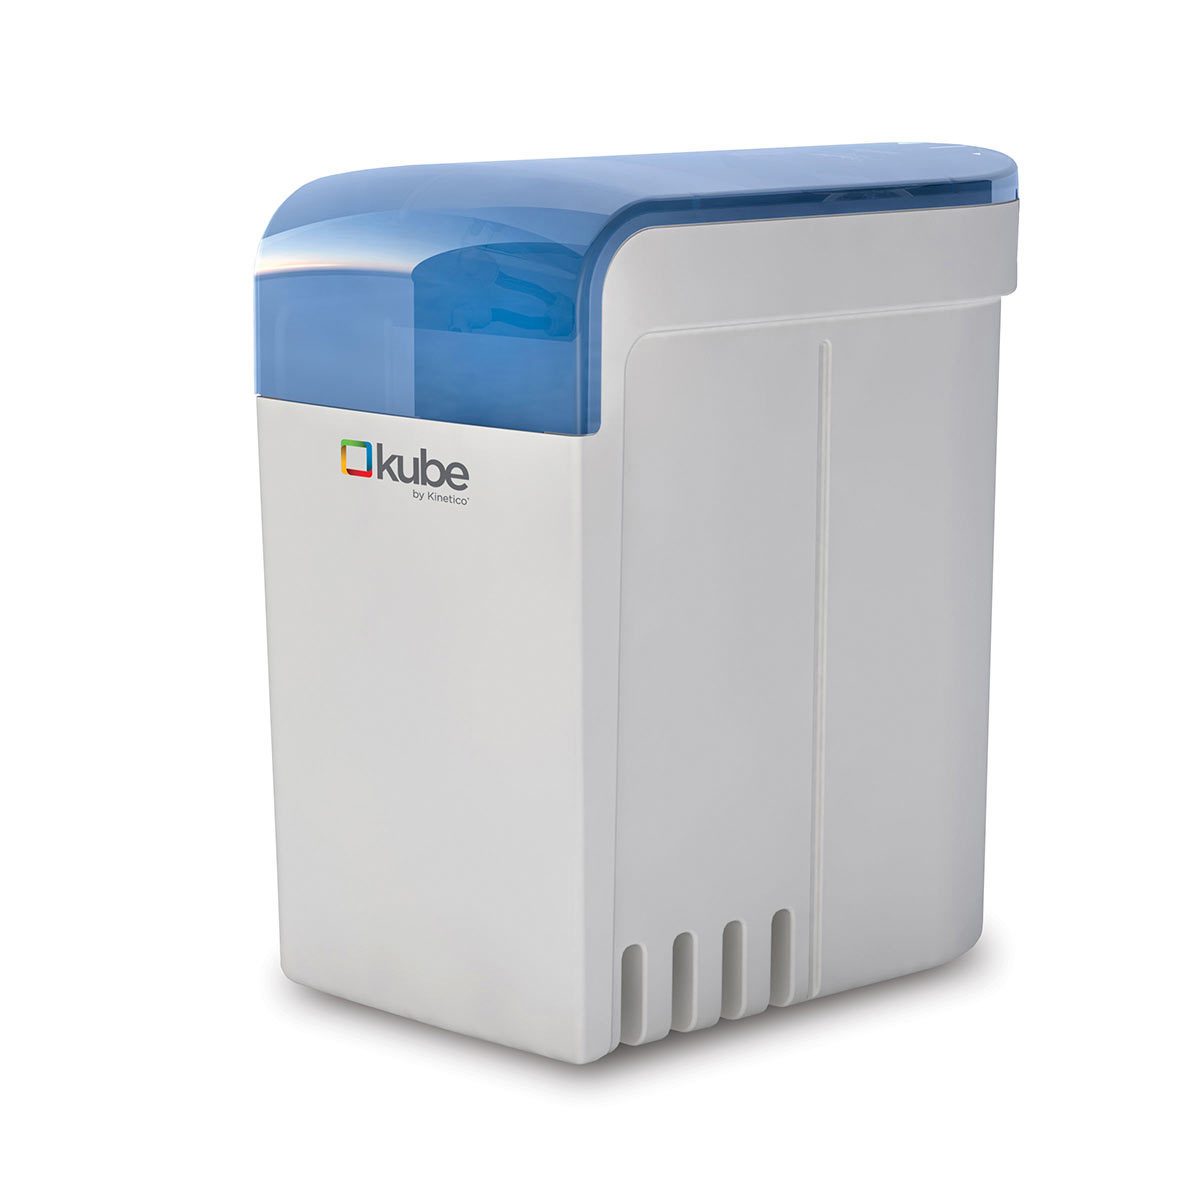 Kinetico Kube 2 Non-Electric Water Softener - For Households with up to 4 Bathrooms - Signature Retail Stores